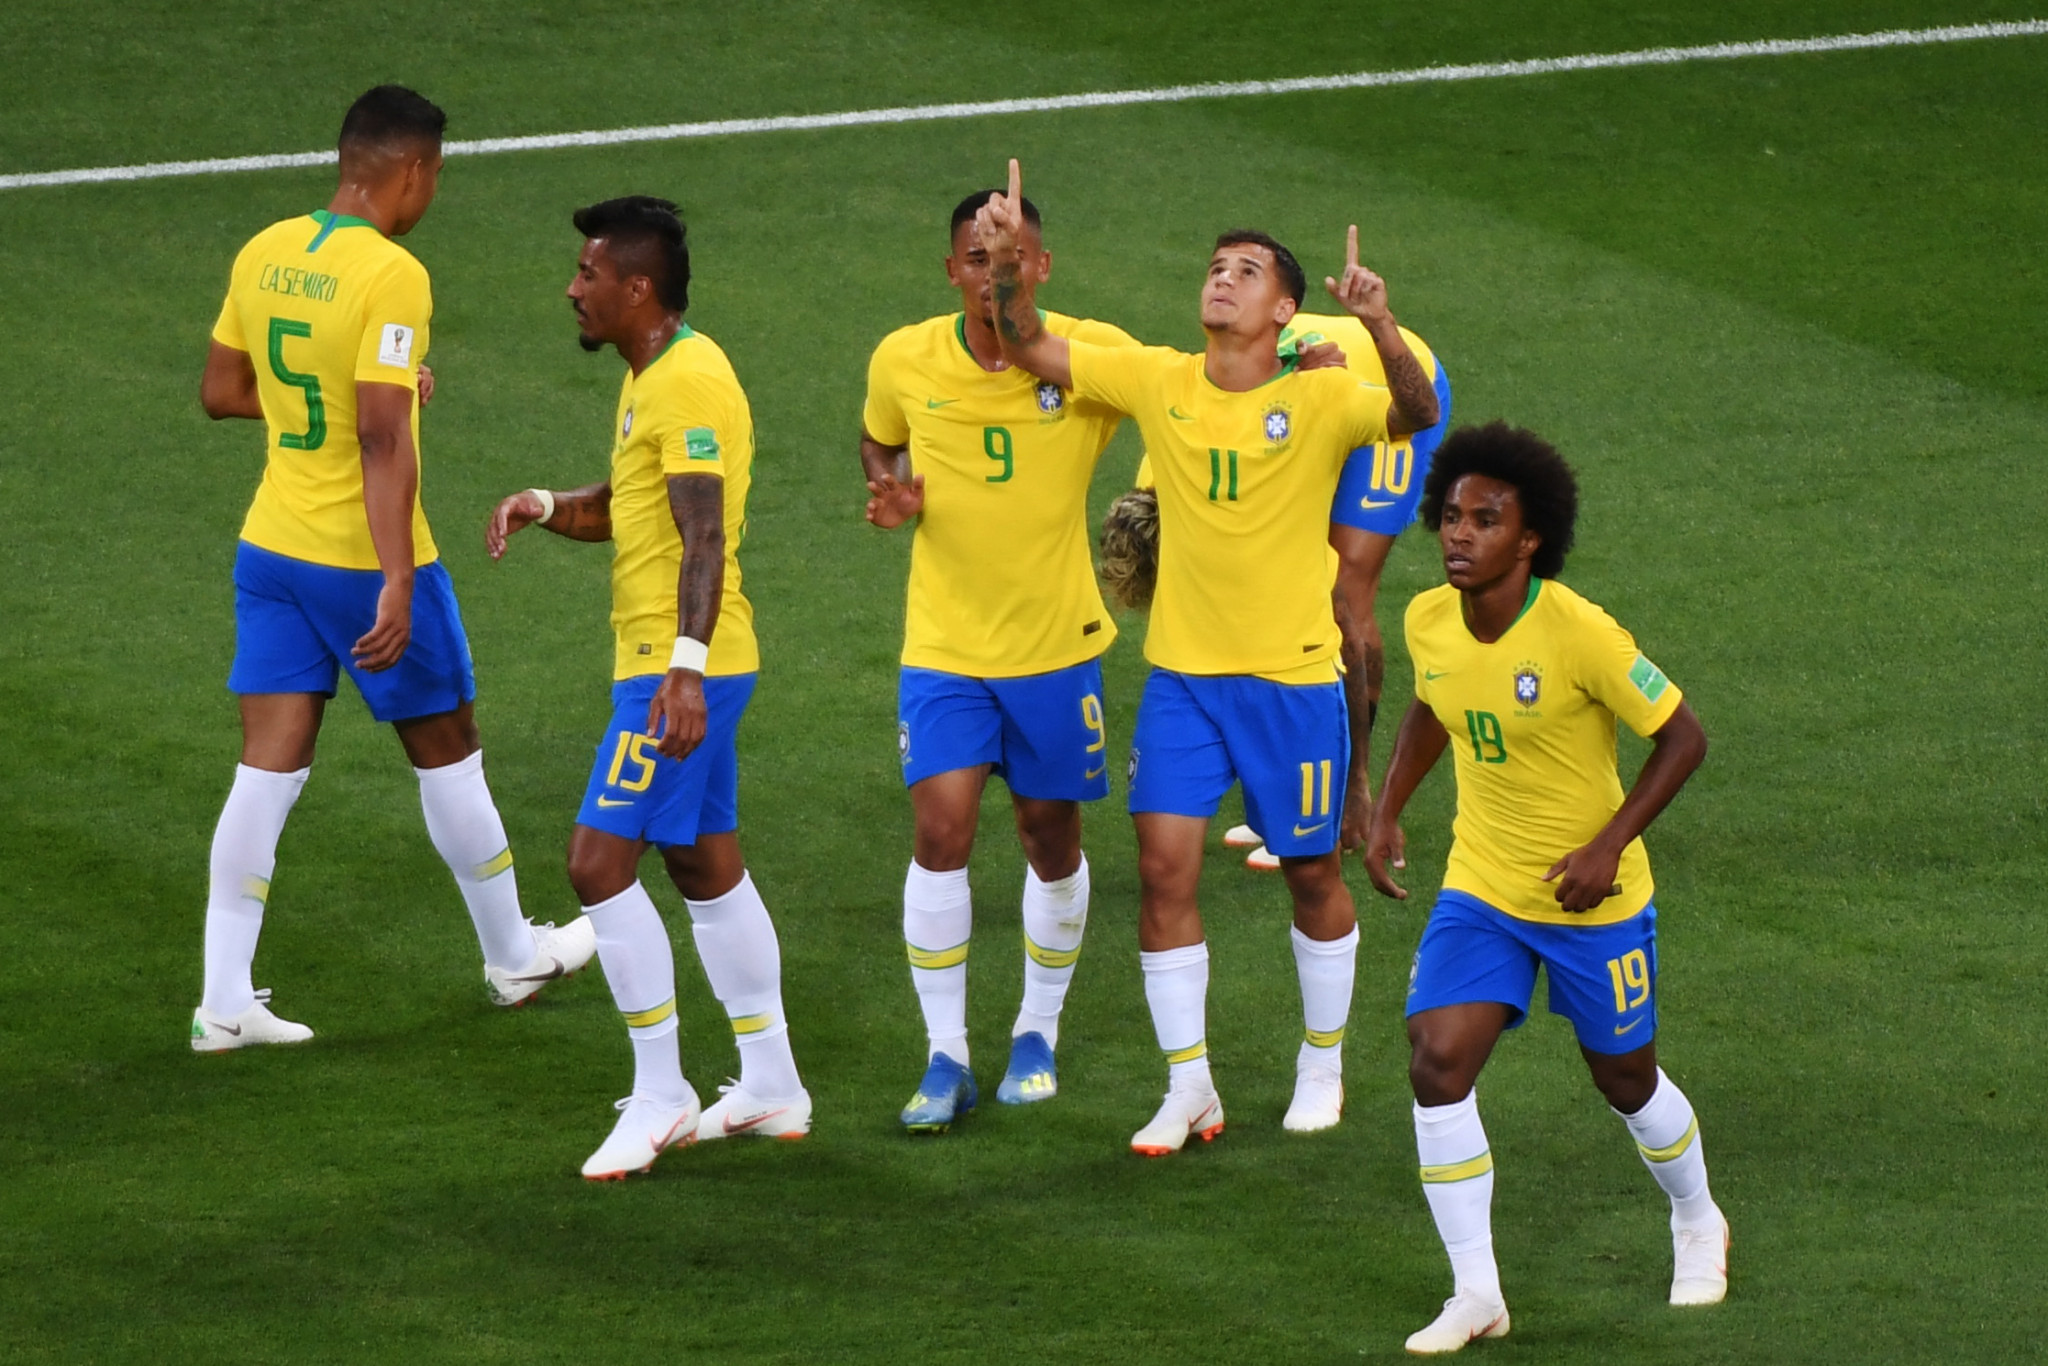 A Philippe Coutinho wonder goal put Brazil in front against Switzerland ©Getty Images